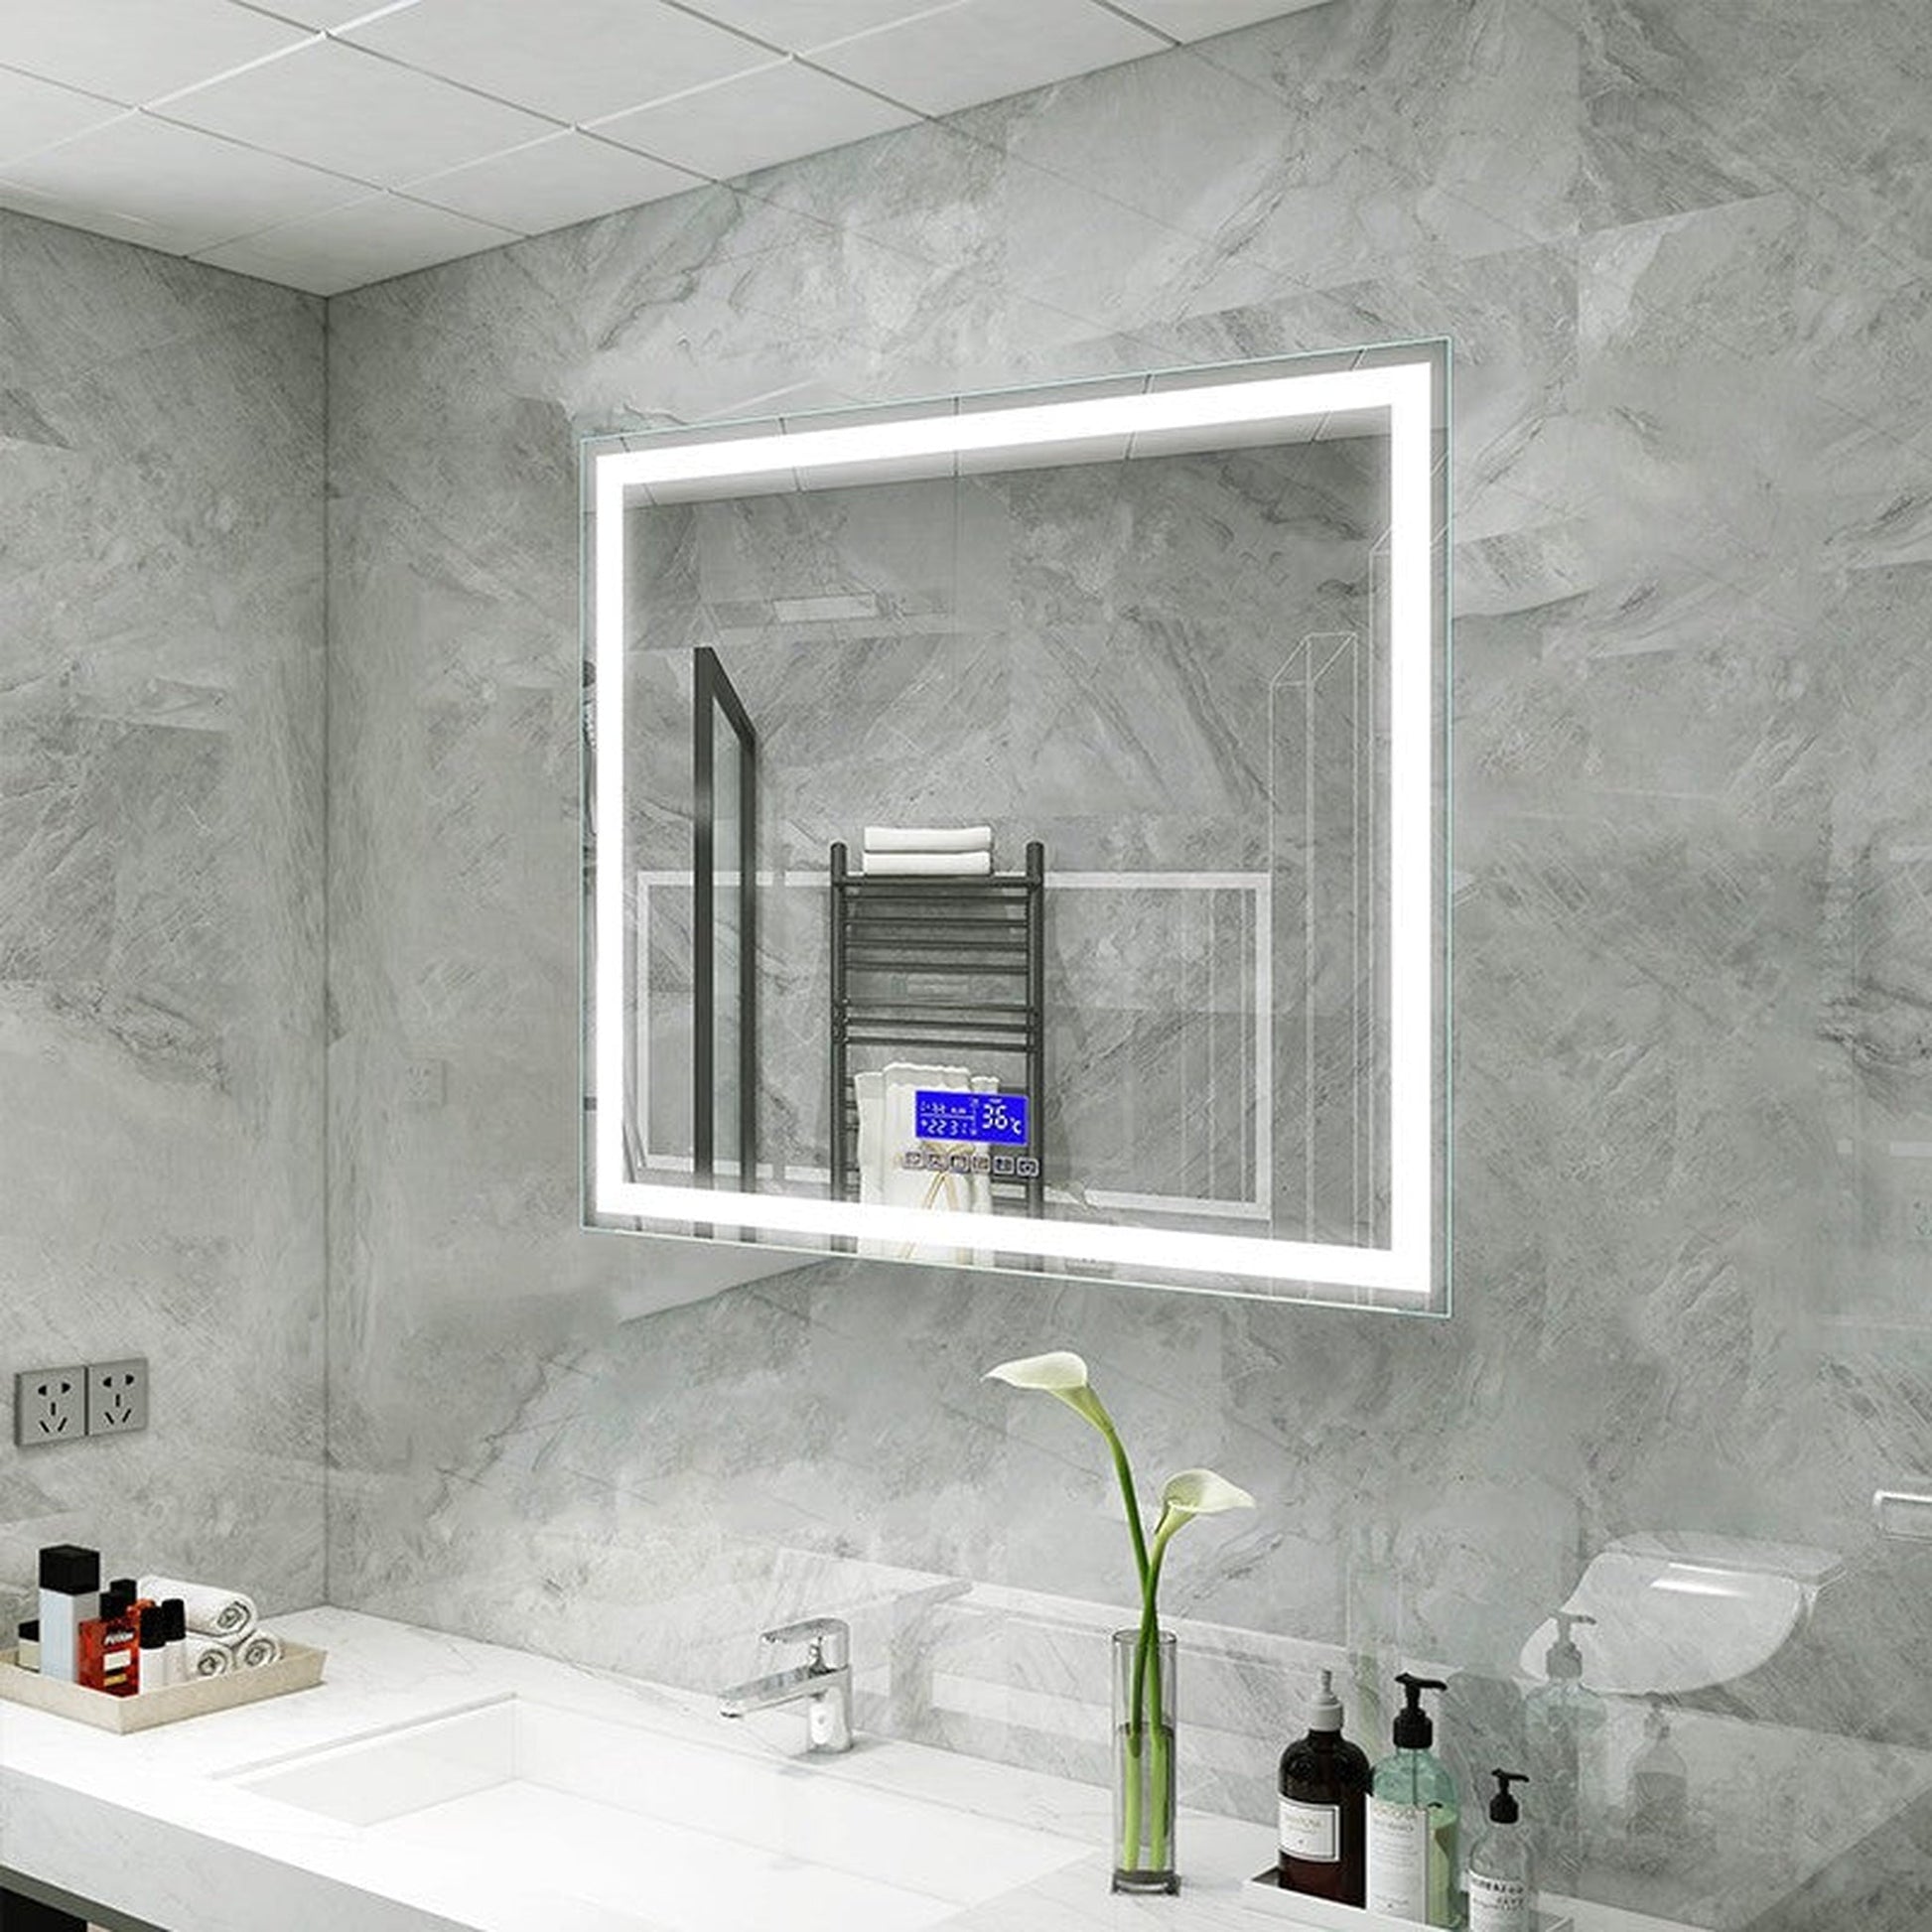 Moreno Florence 40" x 36" Frameless LED Mirror With Bluetooth, Time, and Temperature